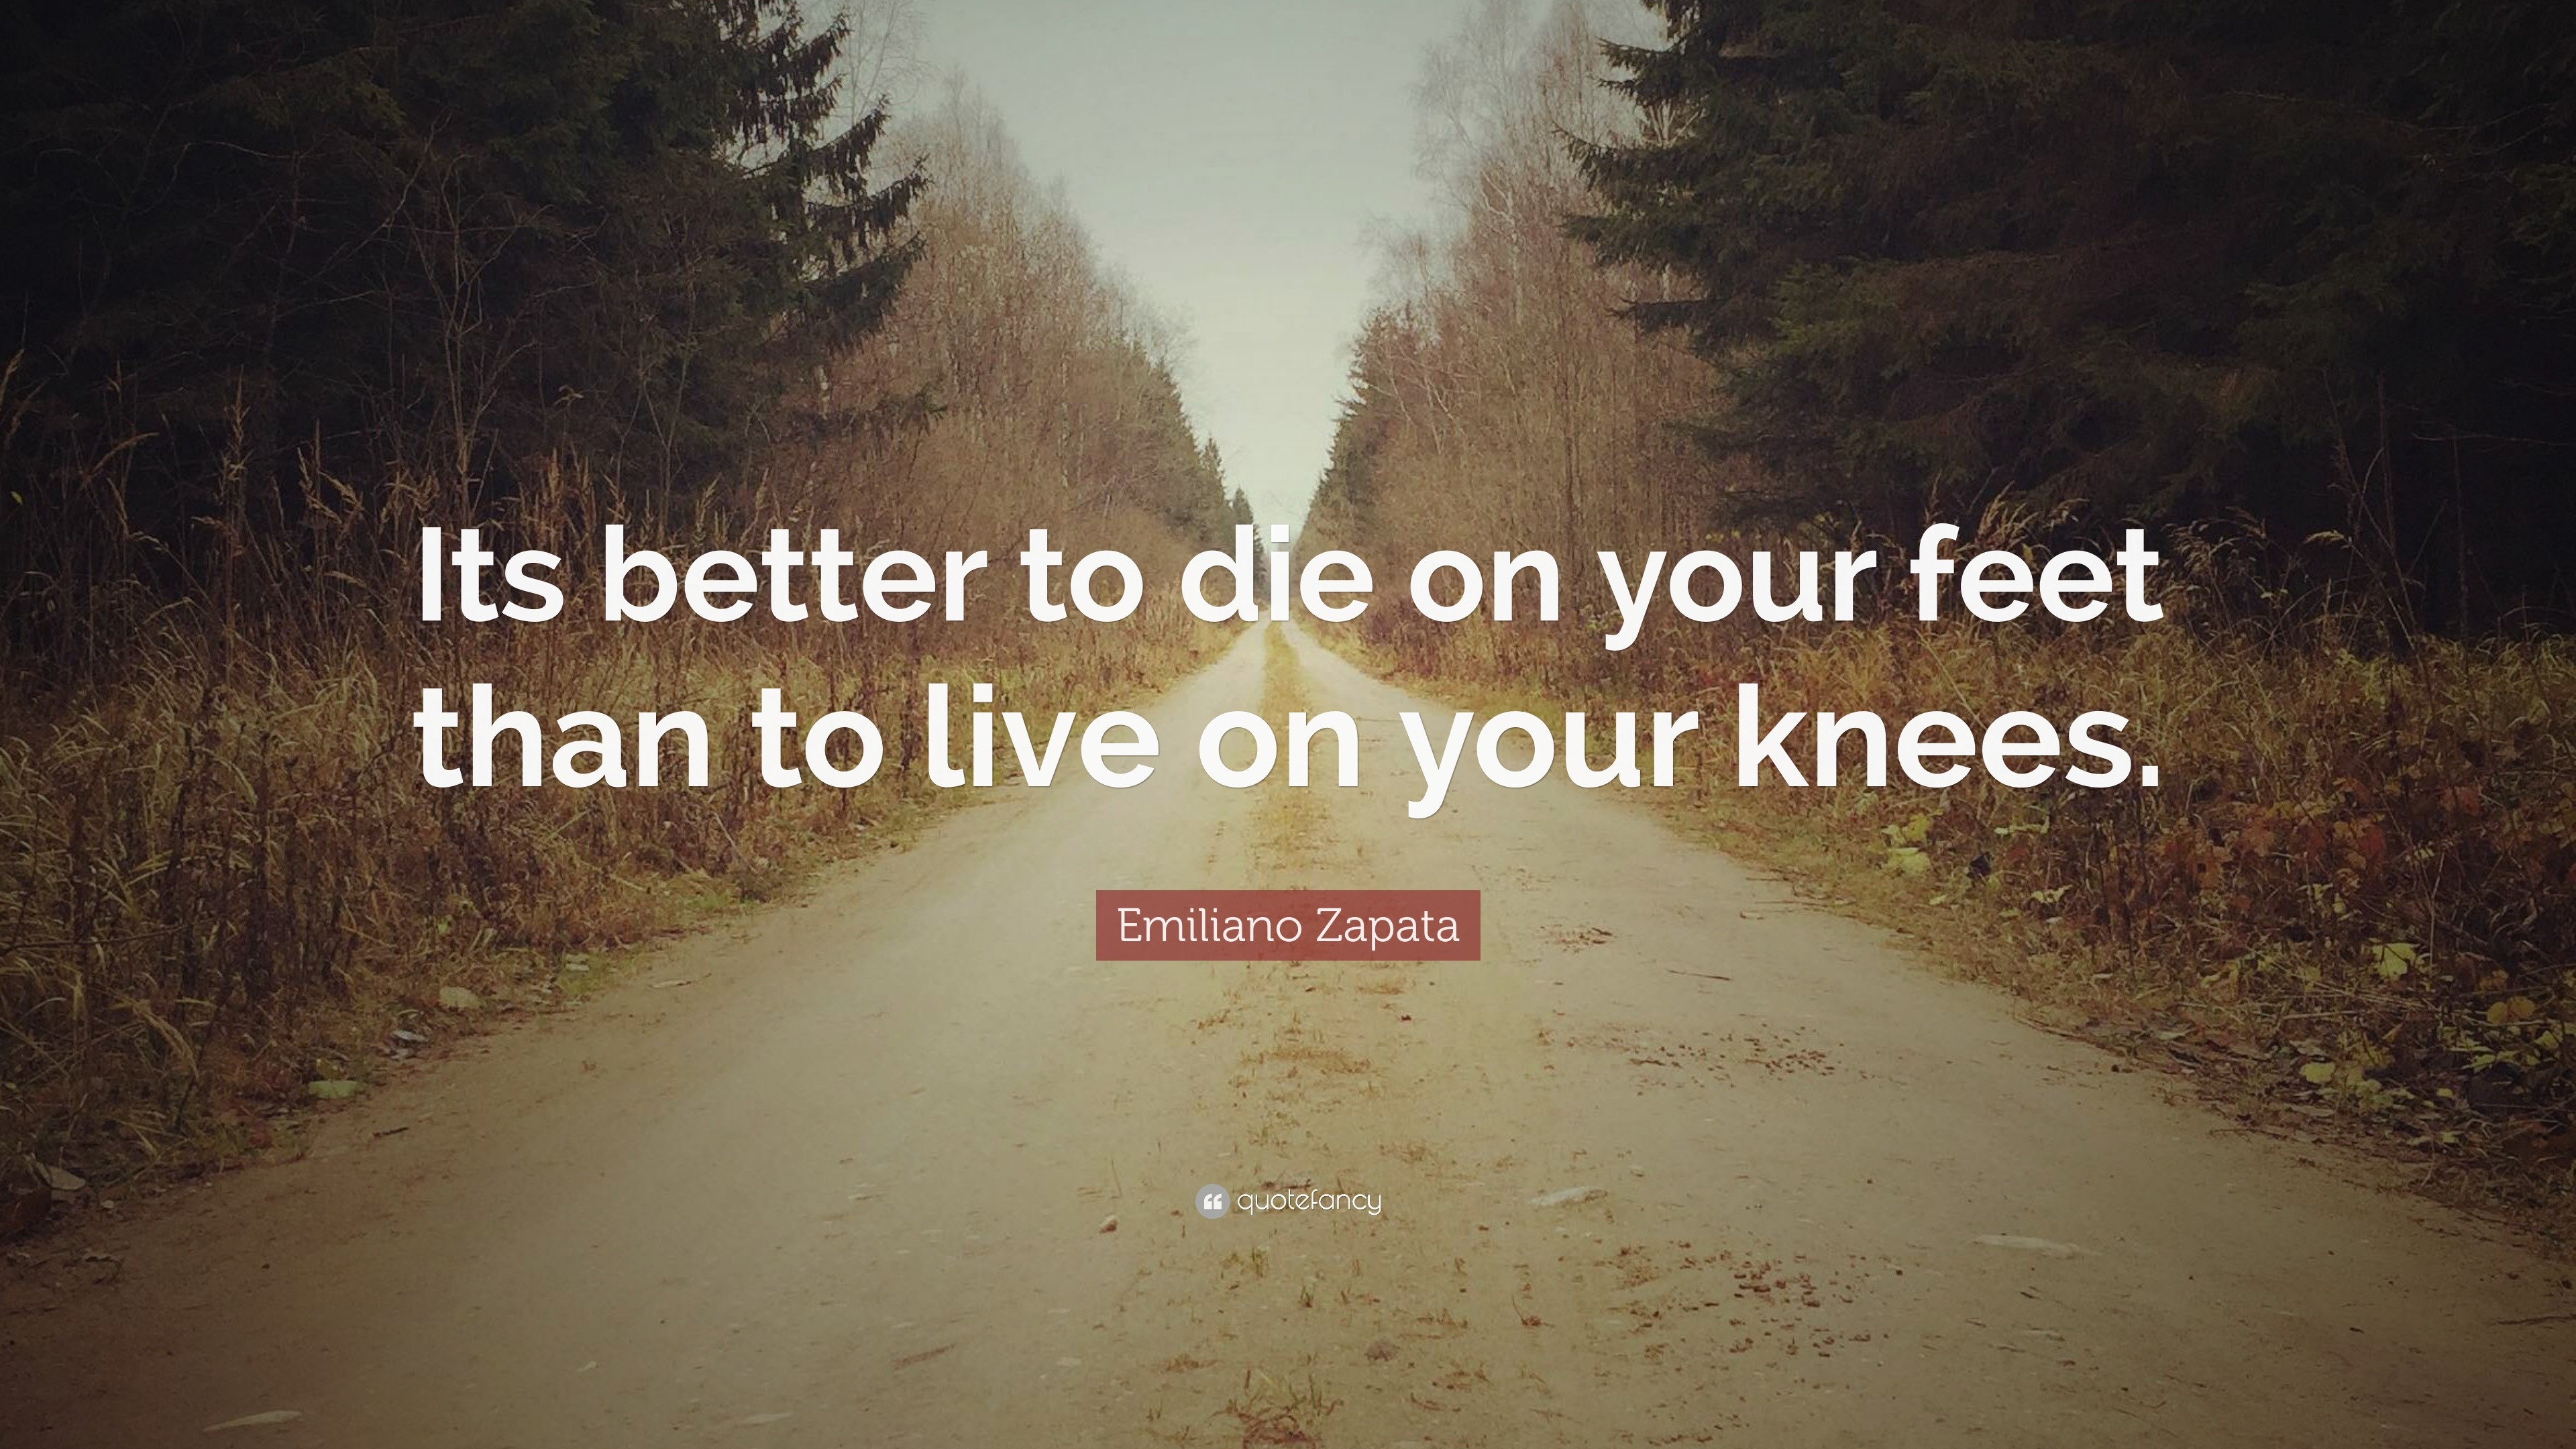 Emiliano Zapata Quote: “Its better to die on your feet than to live on ...